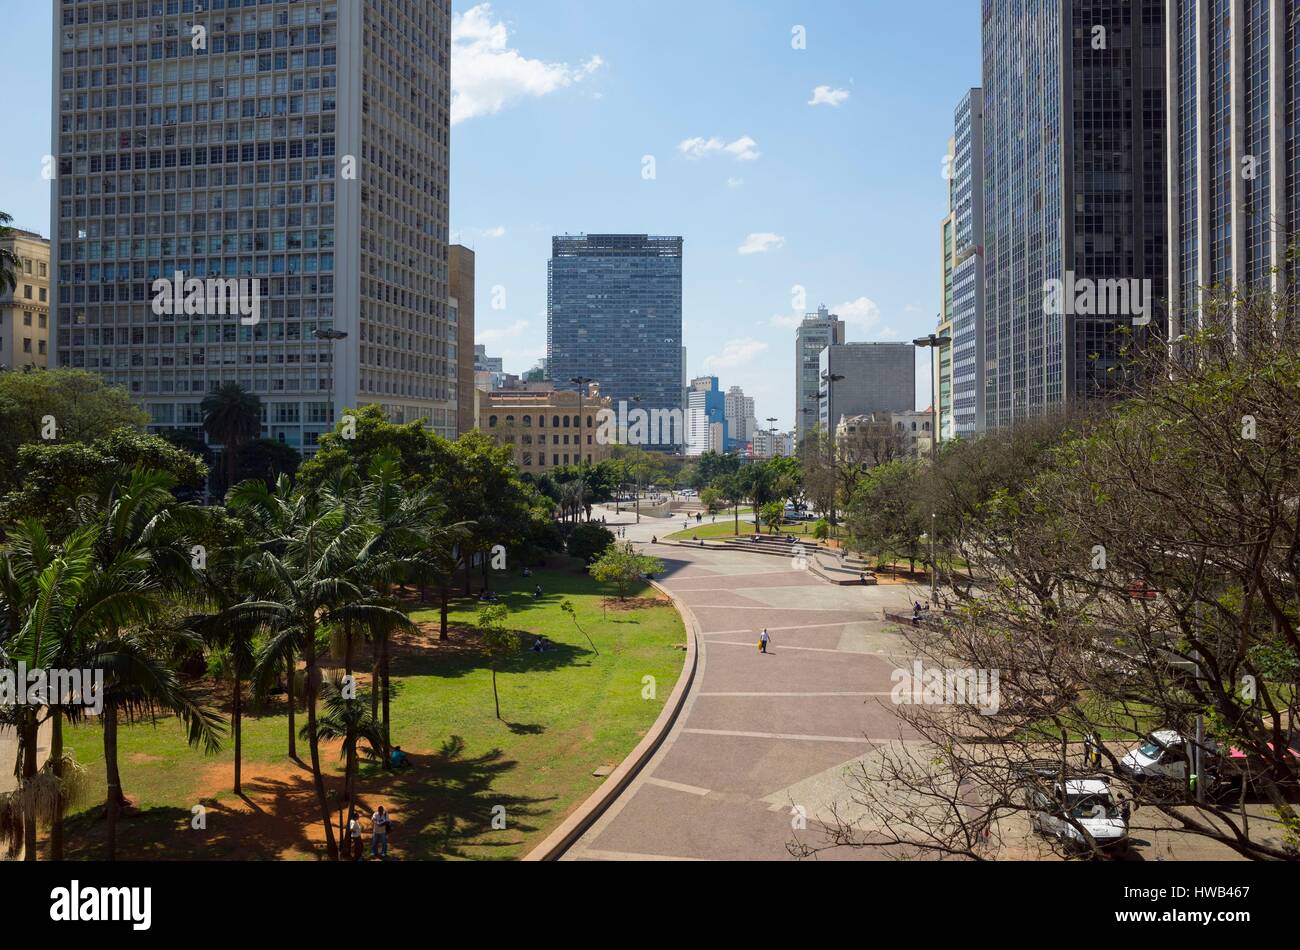 Brazil, Sao Paulo state, Sao Paulo, central district built in the 1960-1970s Stock Photo